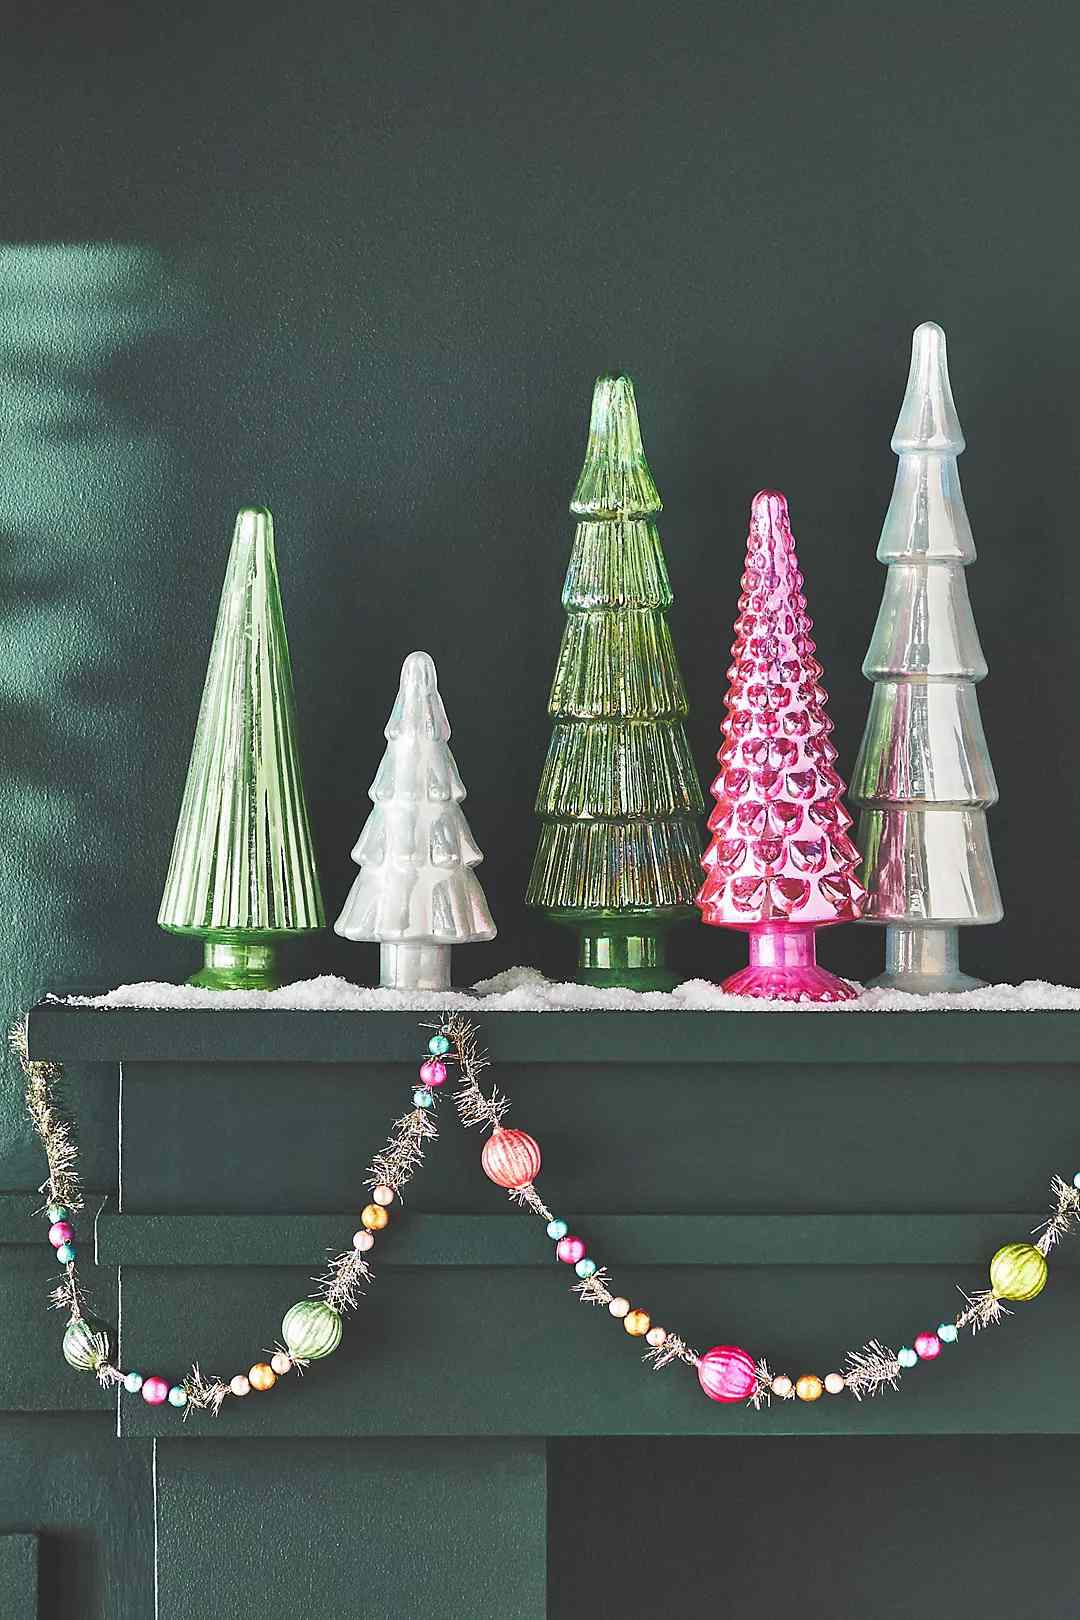 Glass tree holiday decorations